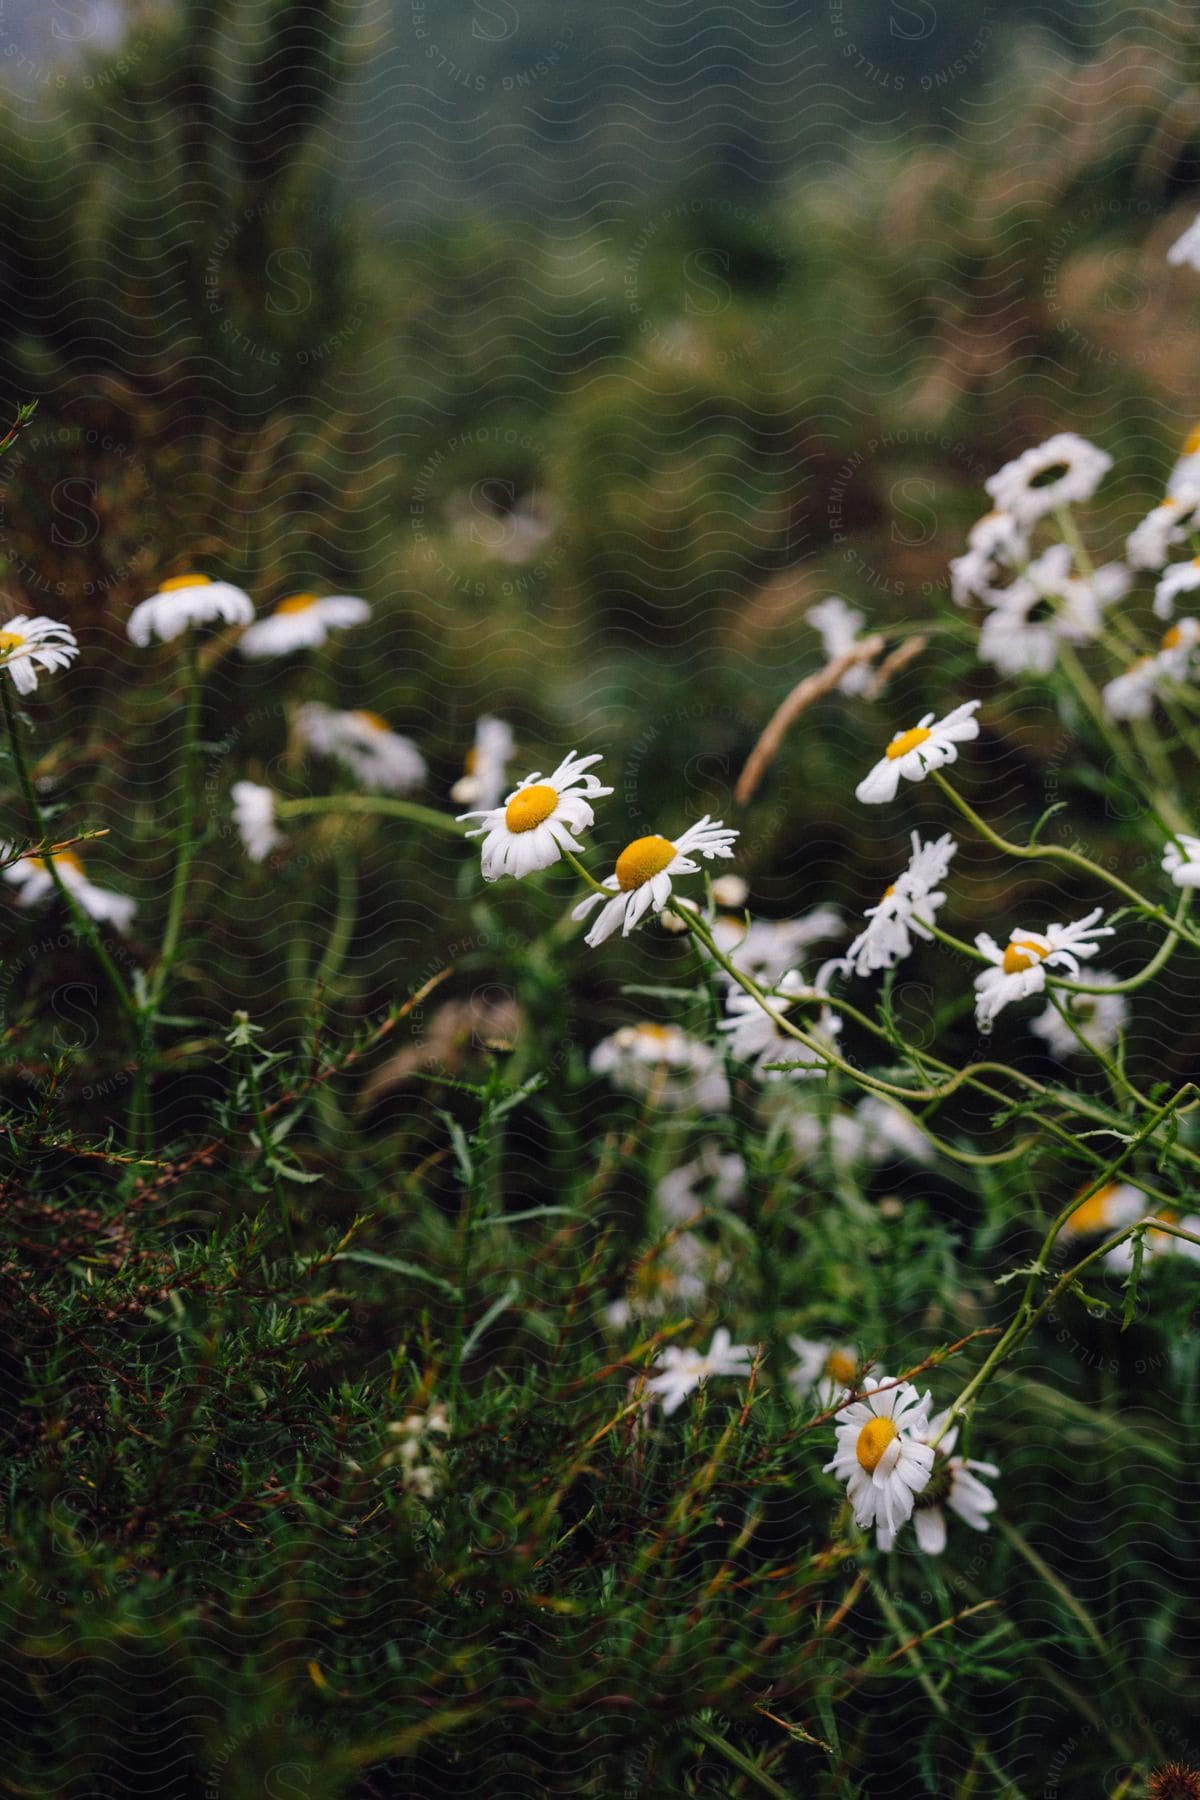 Stock photo of wild daisies in bloom among green vegetation